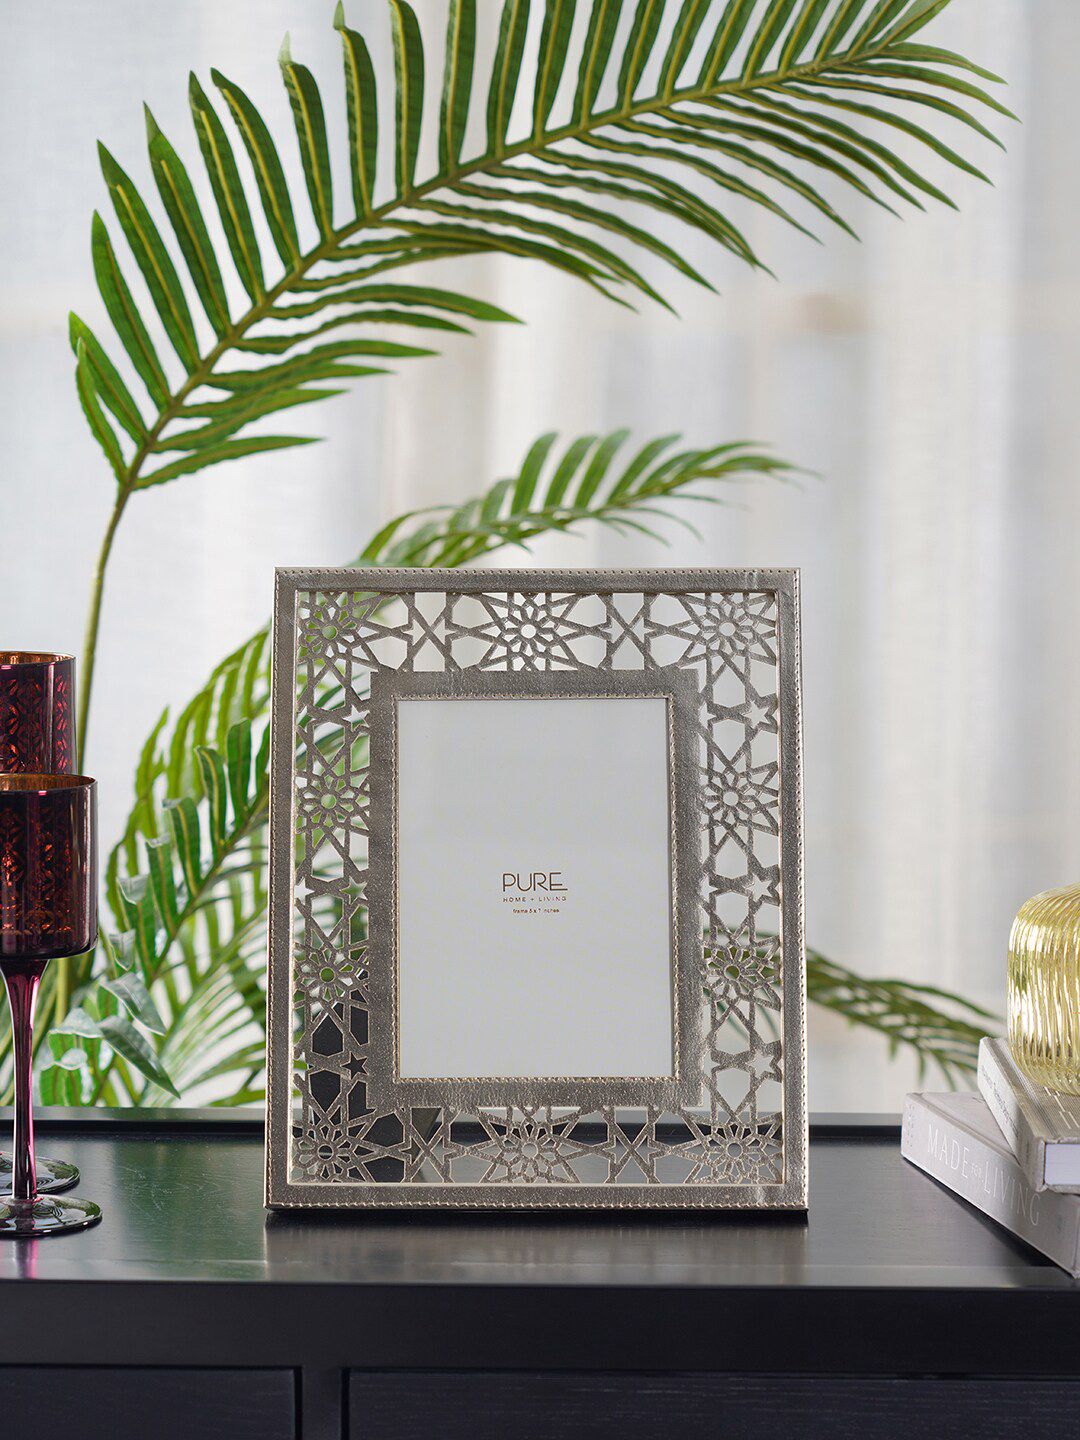 Pure Home and Living Gold-Colored Textured Glass Table Photo Frame Price in India